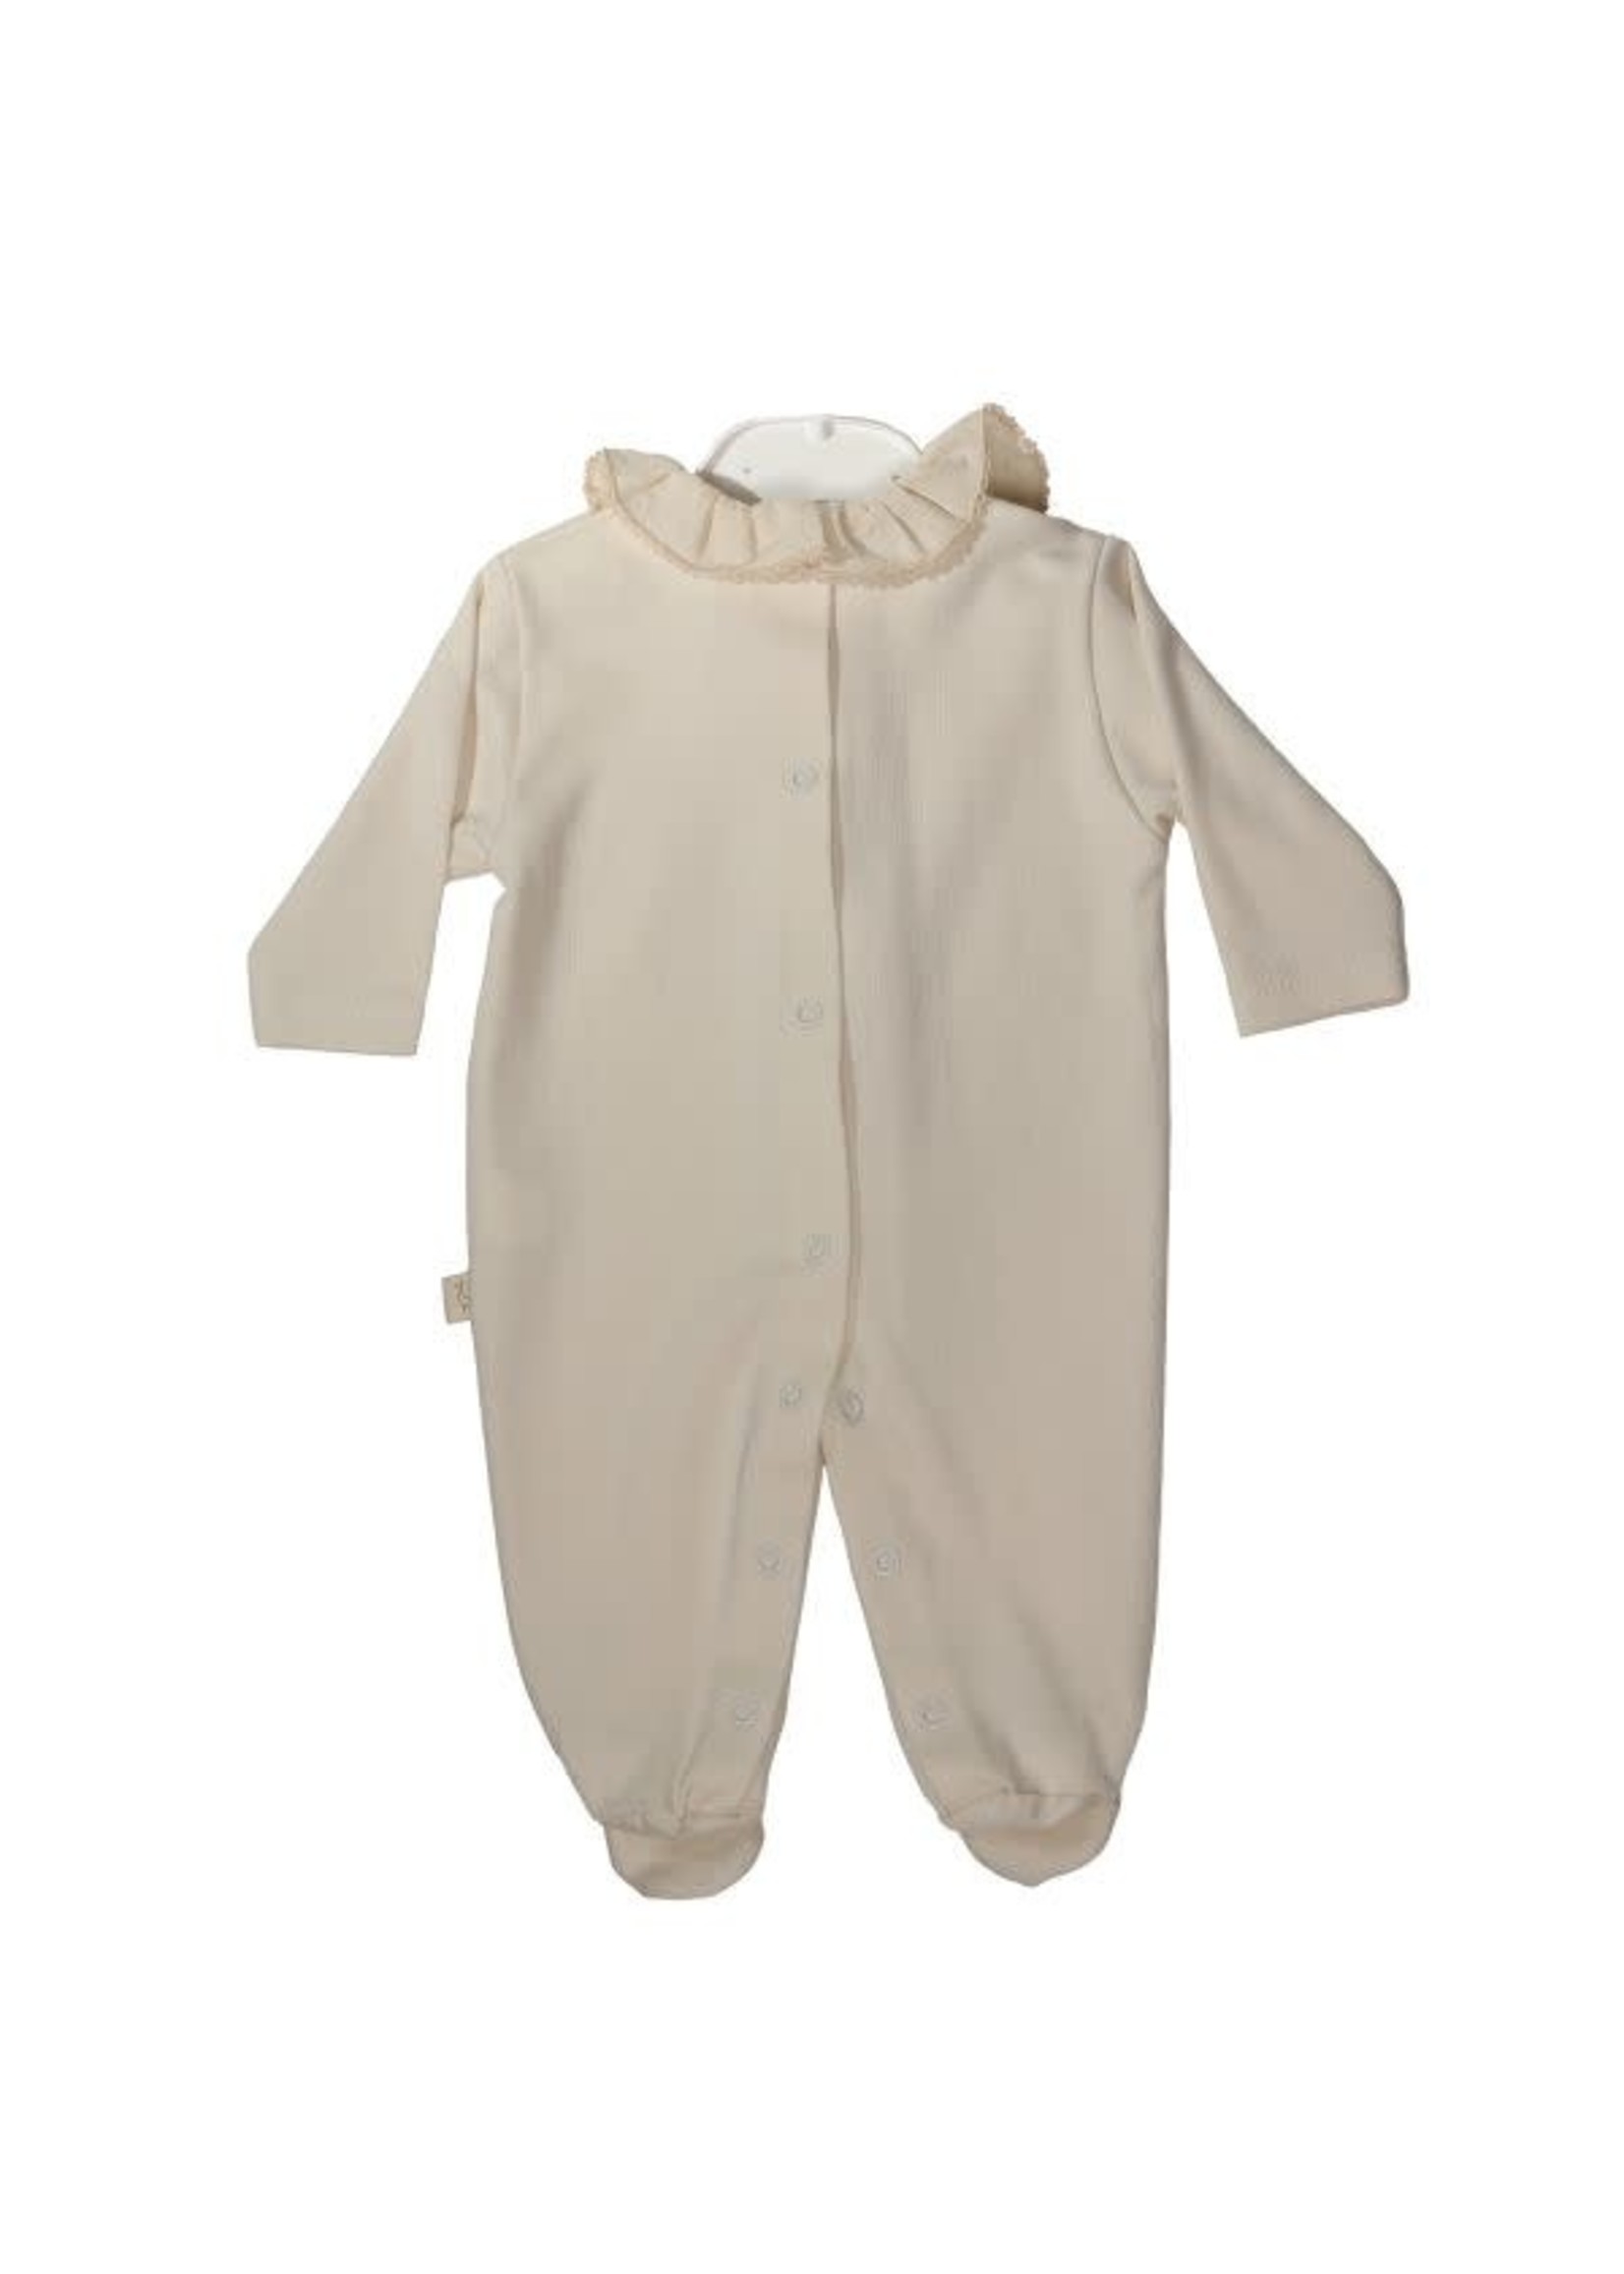 Baby Gi Beige Babygrow With Frilly Collar Organic Cotton